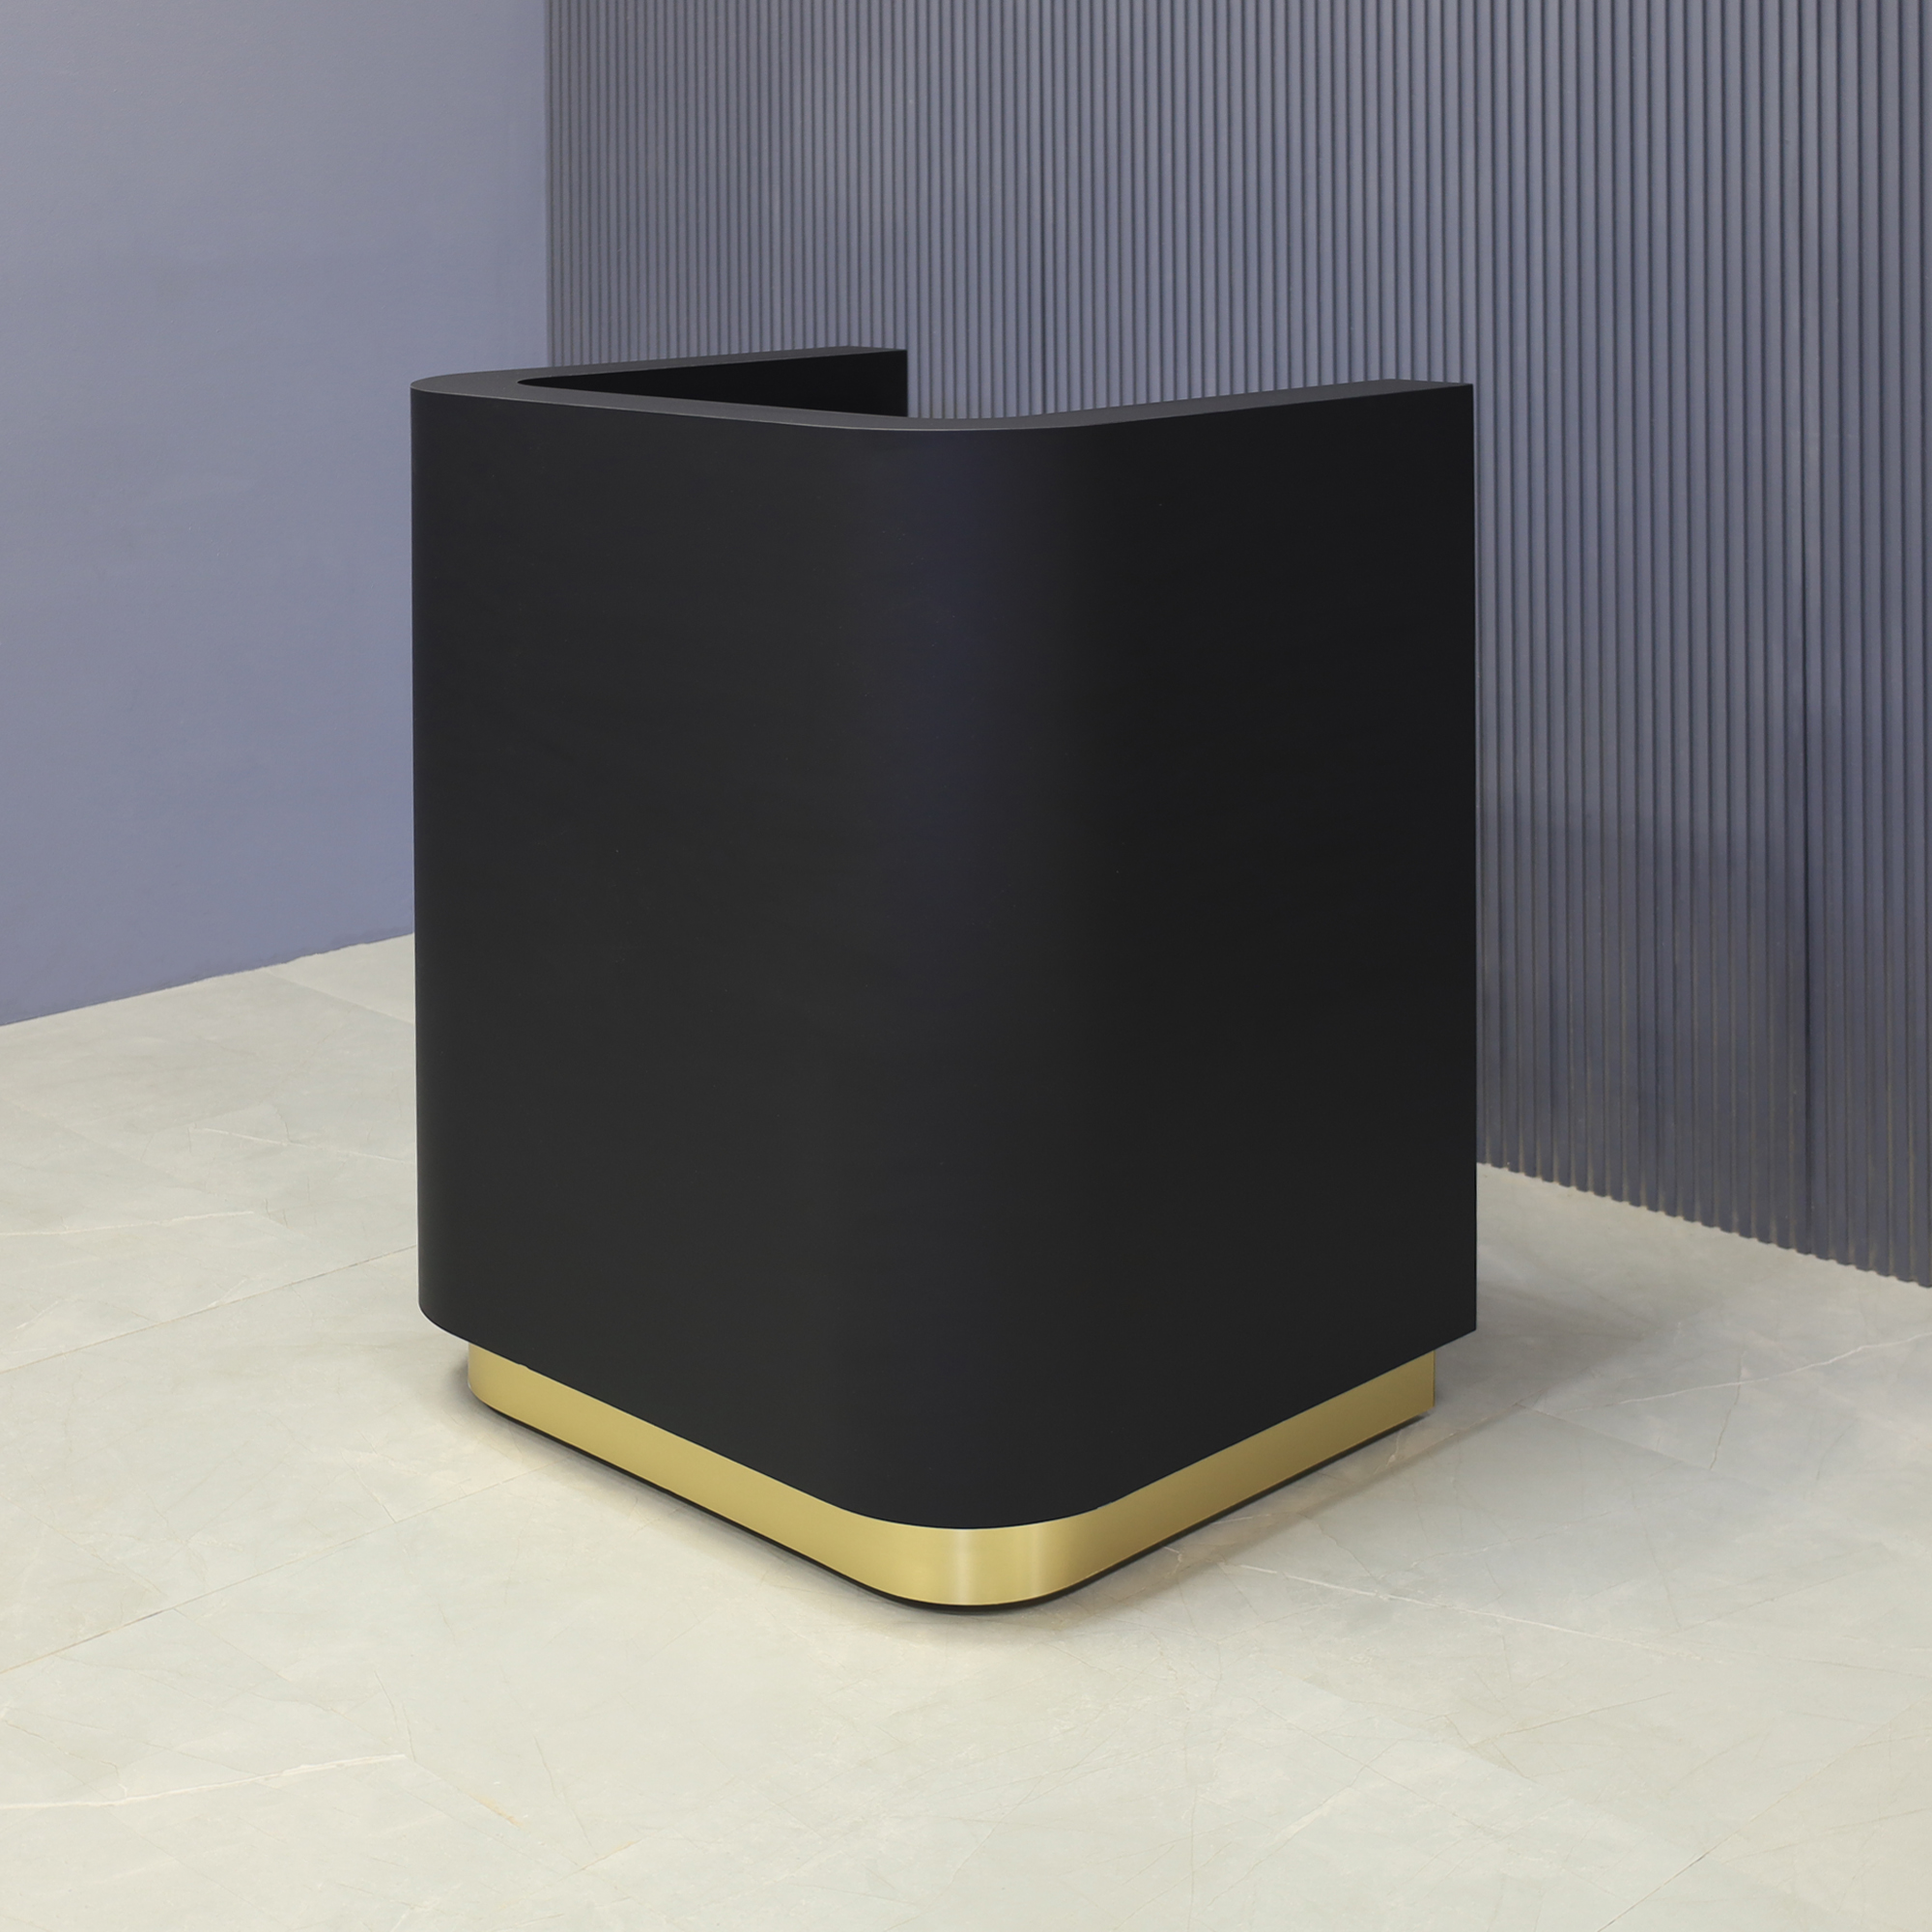 36-inch Nola Podium & Host in black traceless laminate main desk and brushed gold toe-kick, shown here.